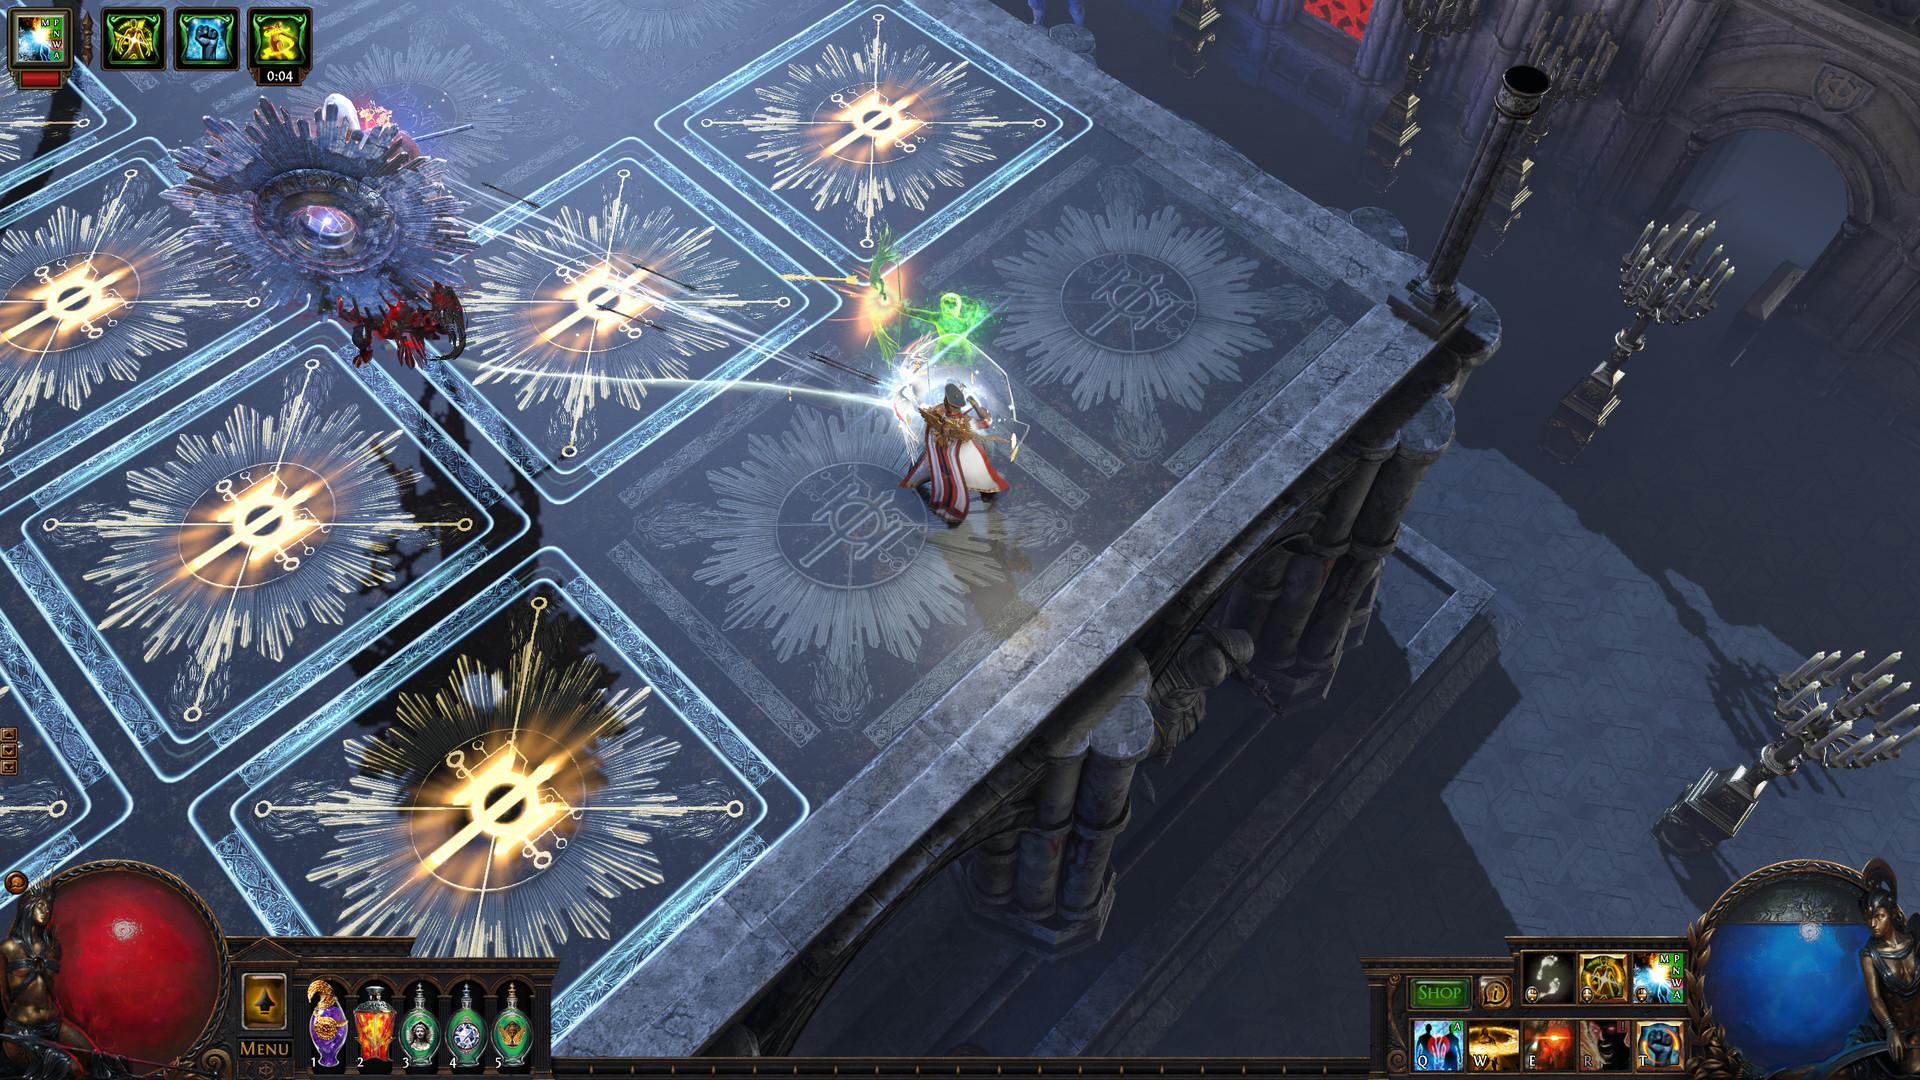 Screenshot №24 from game Path of Exile